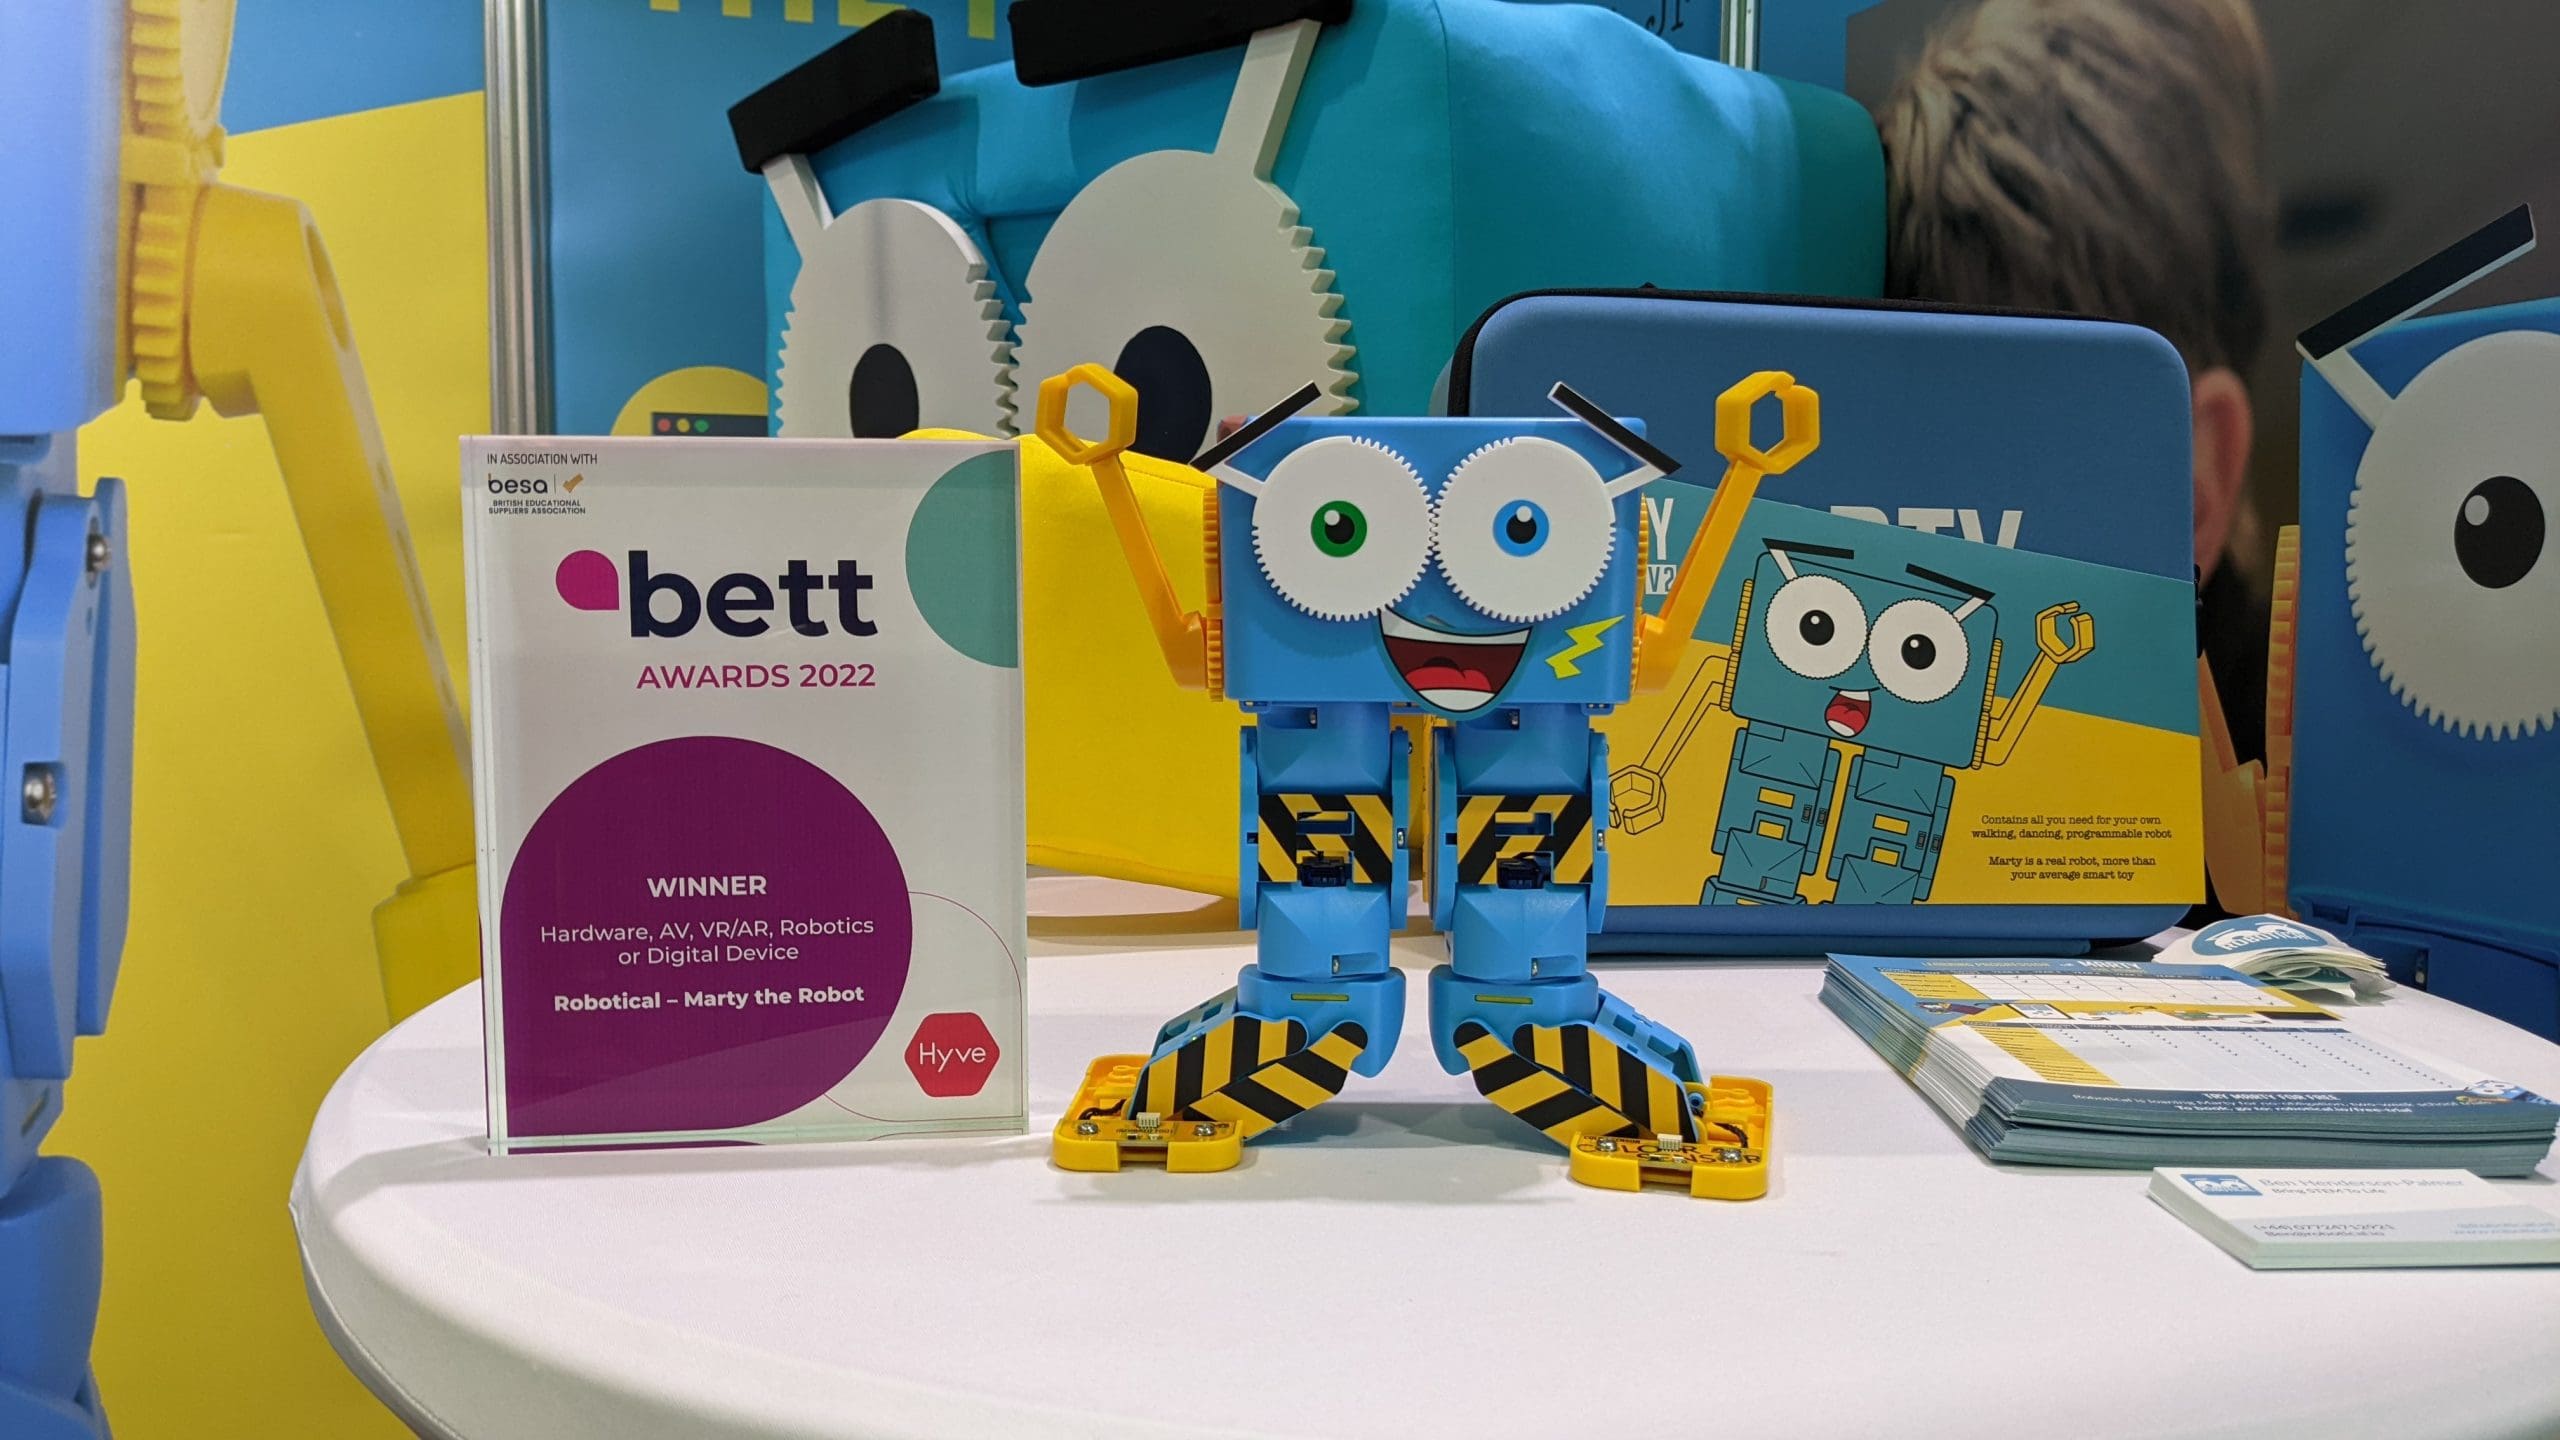 Celebratory Marty the robot standing next to bett awards trophy